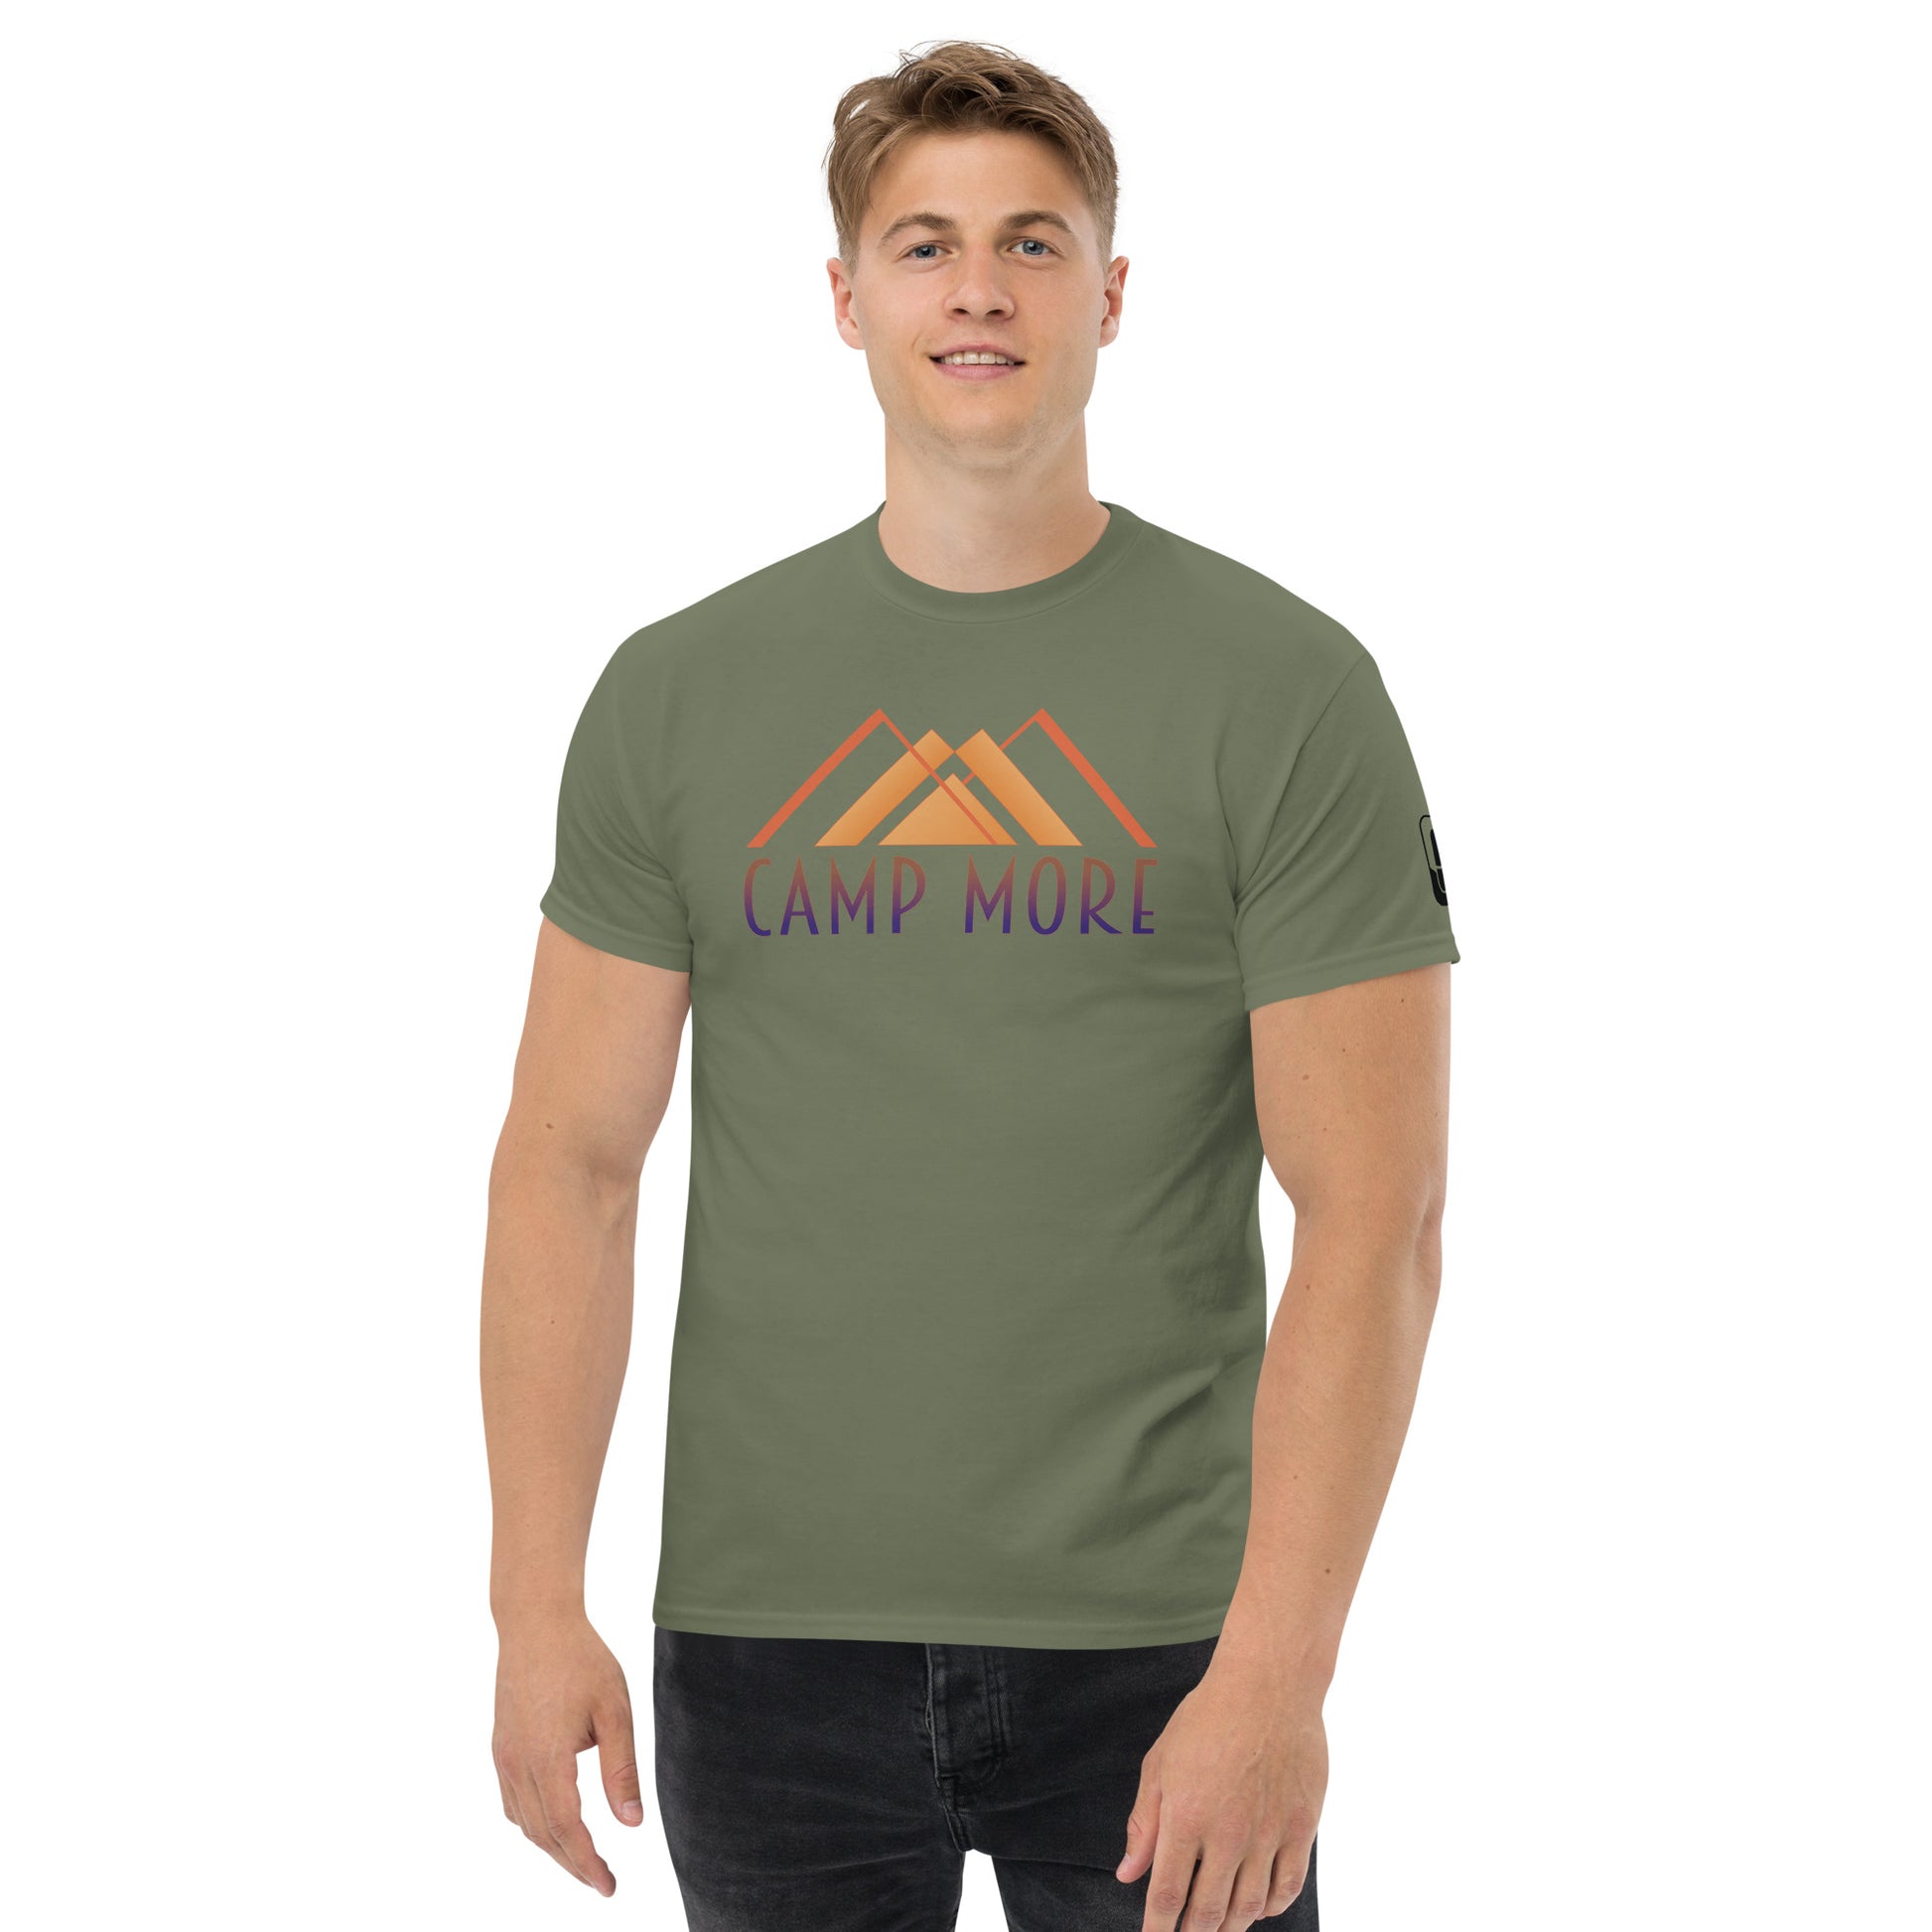 Smiling young man wearing an military green t-shirt with the 'CAMP MORE' slogan in stylized lettering over a simple mountain graphic, and a logo patch on the sleeve, against a white background